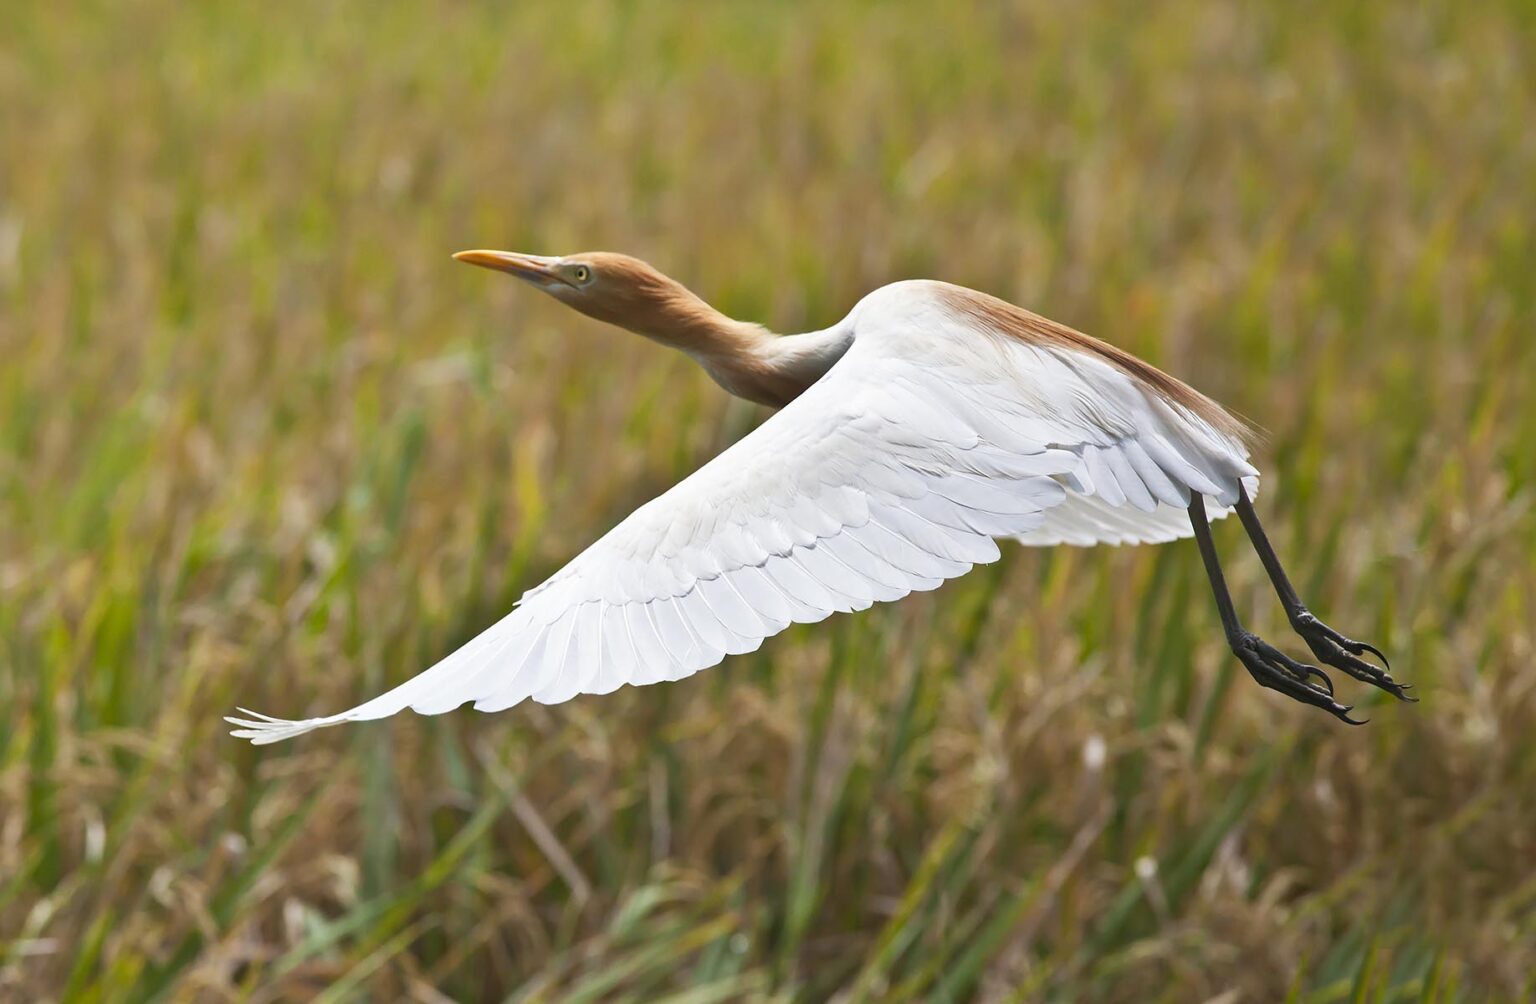 A CATTLE EGRET (Bubulcus ibis) in flight at PETULU where many of the birds nest - UBUD, BALI